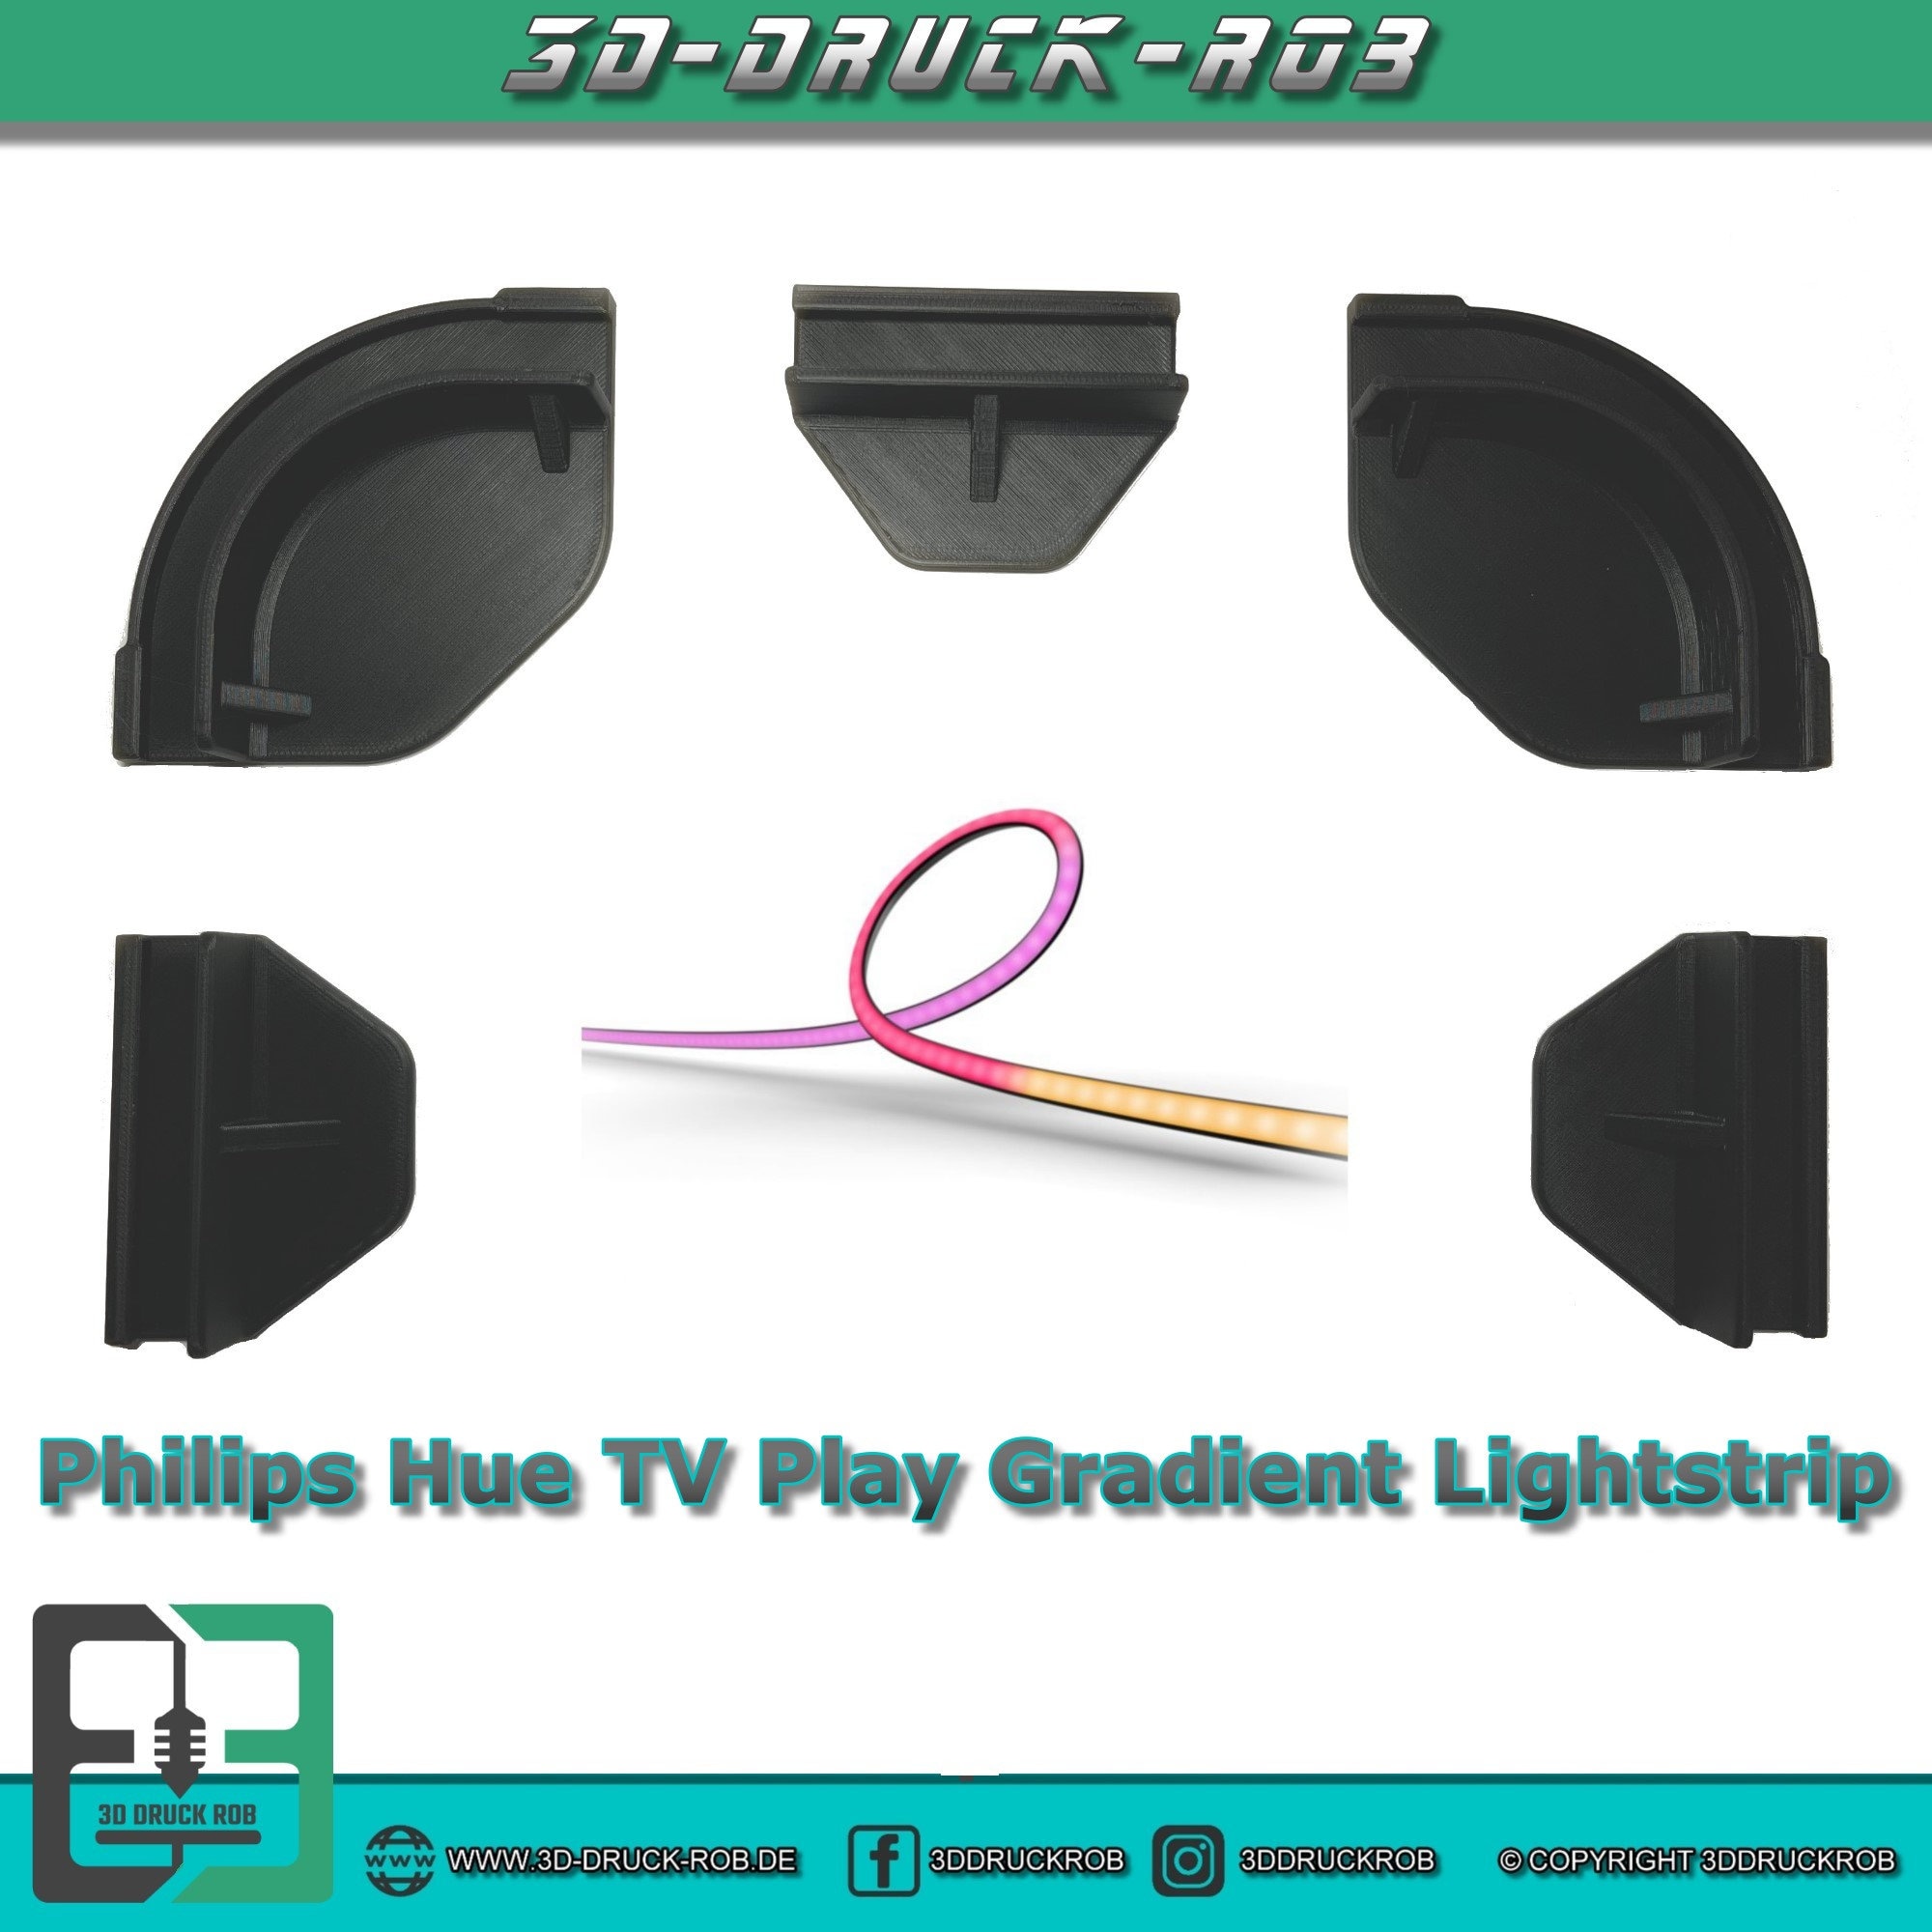 Get to know the Play gradient lightstrip 